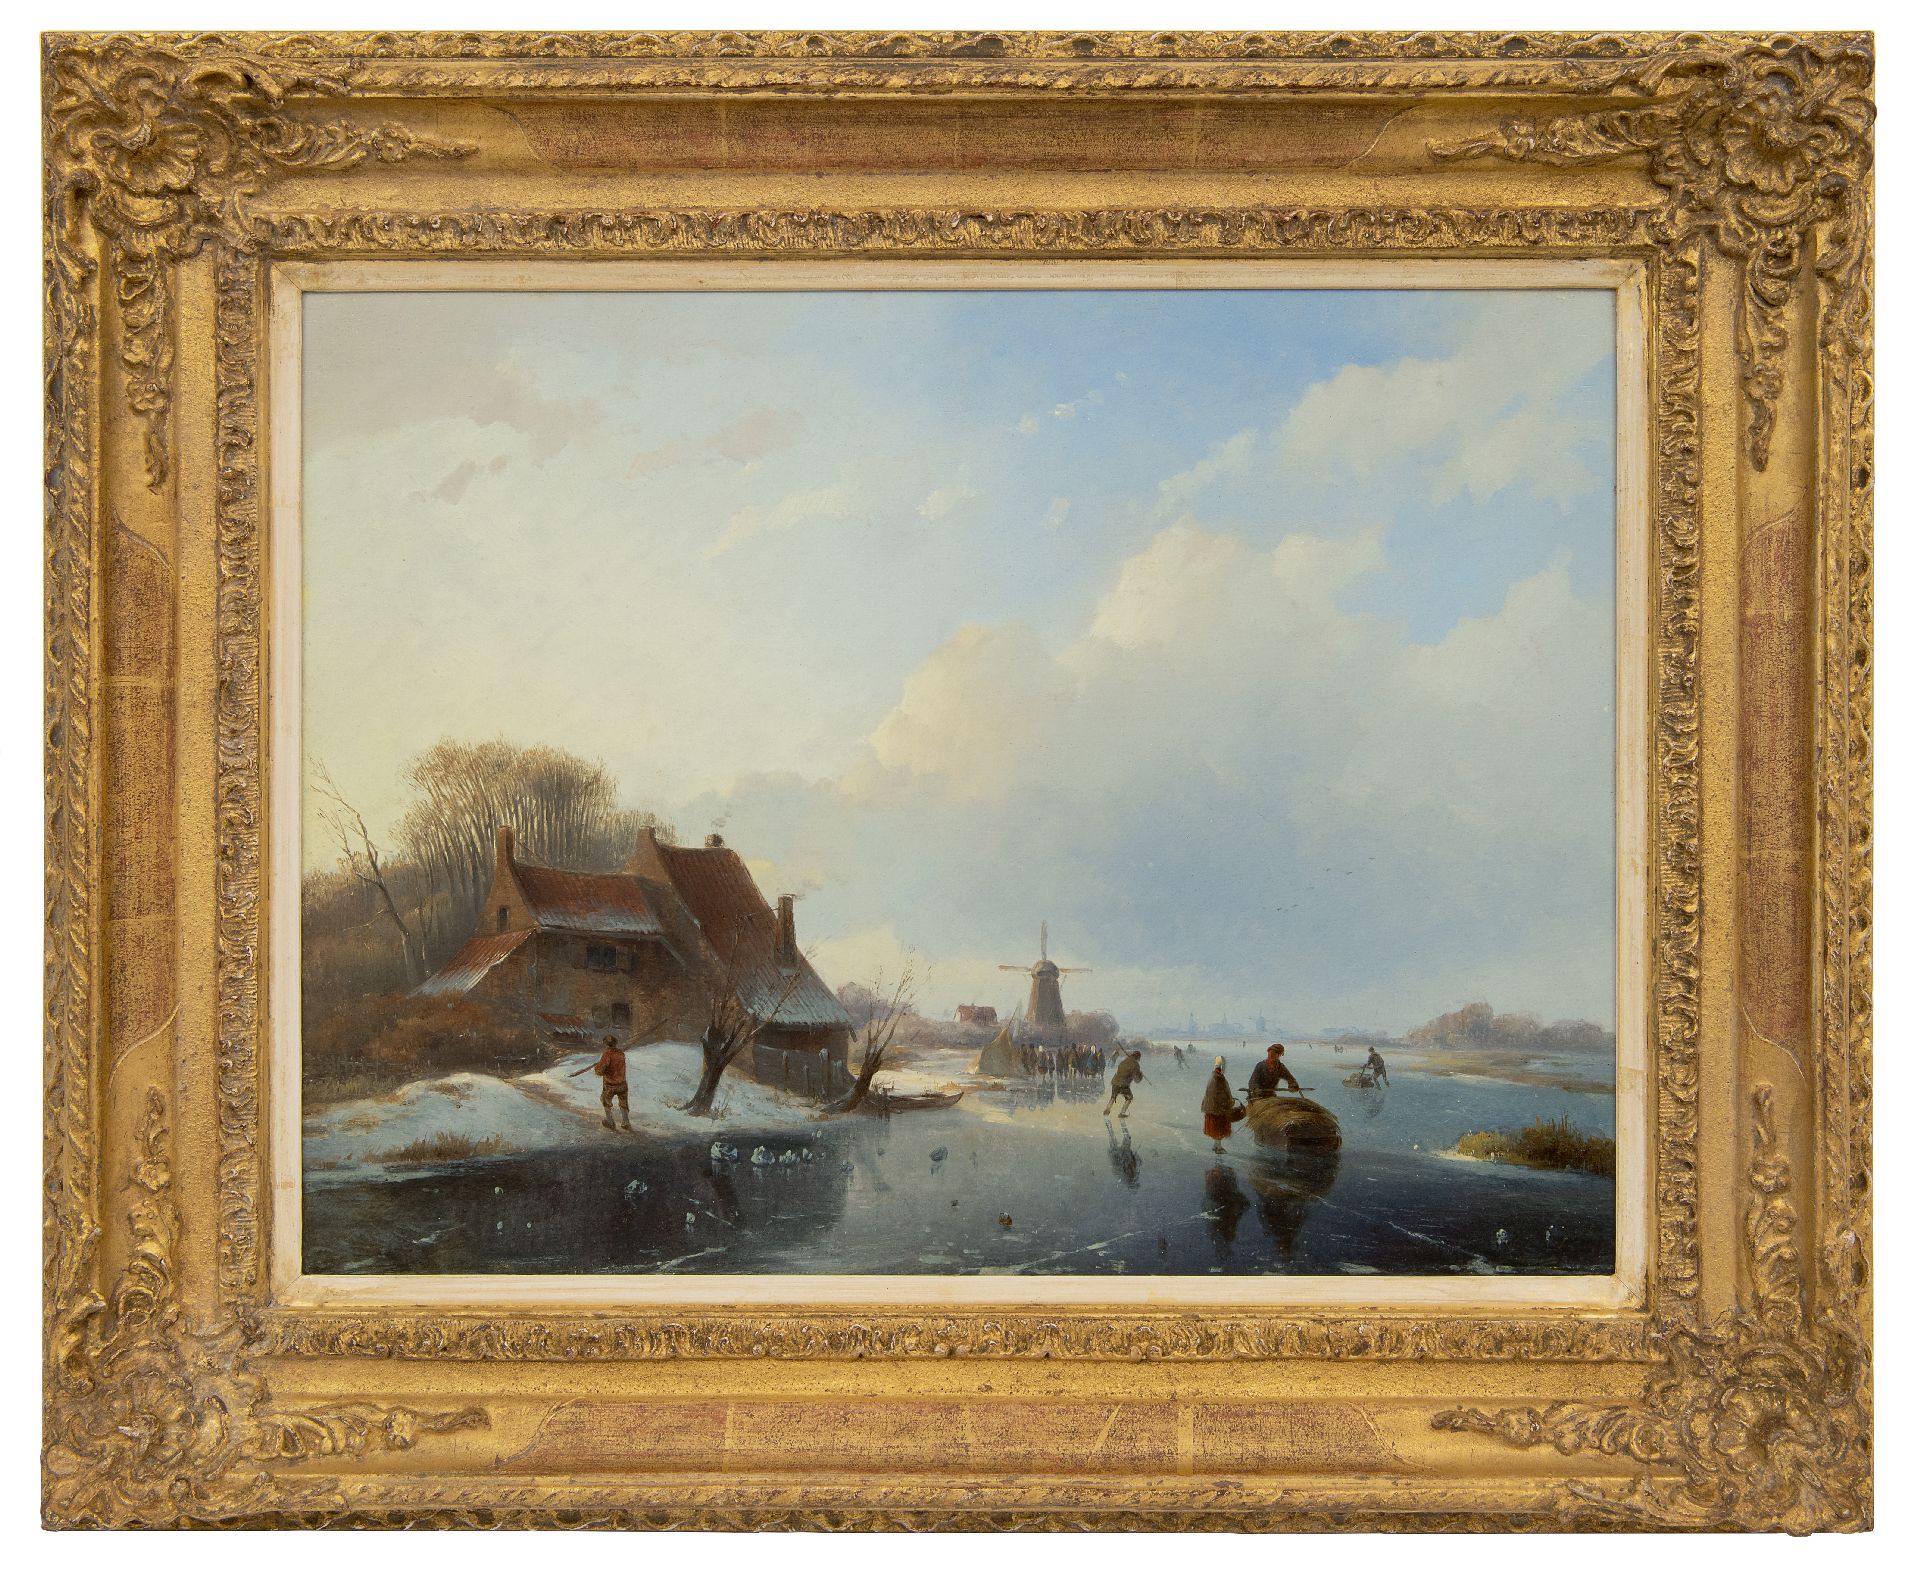 Willem Vester | Paintings prev. for Sale | Clear winter's day on the ice